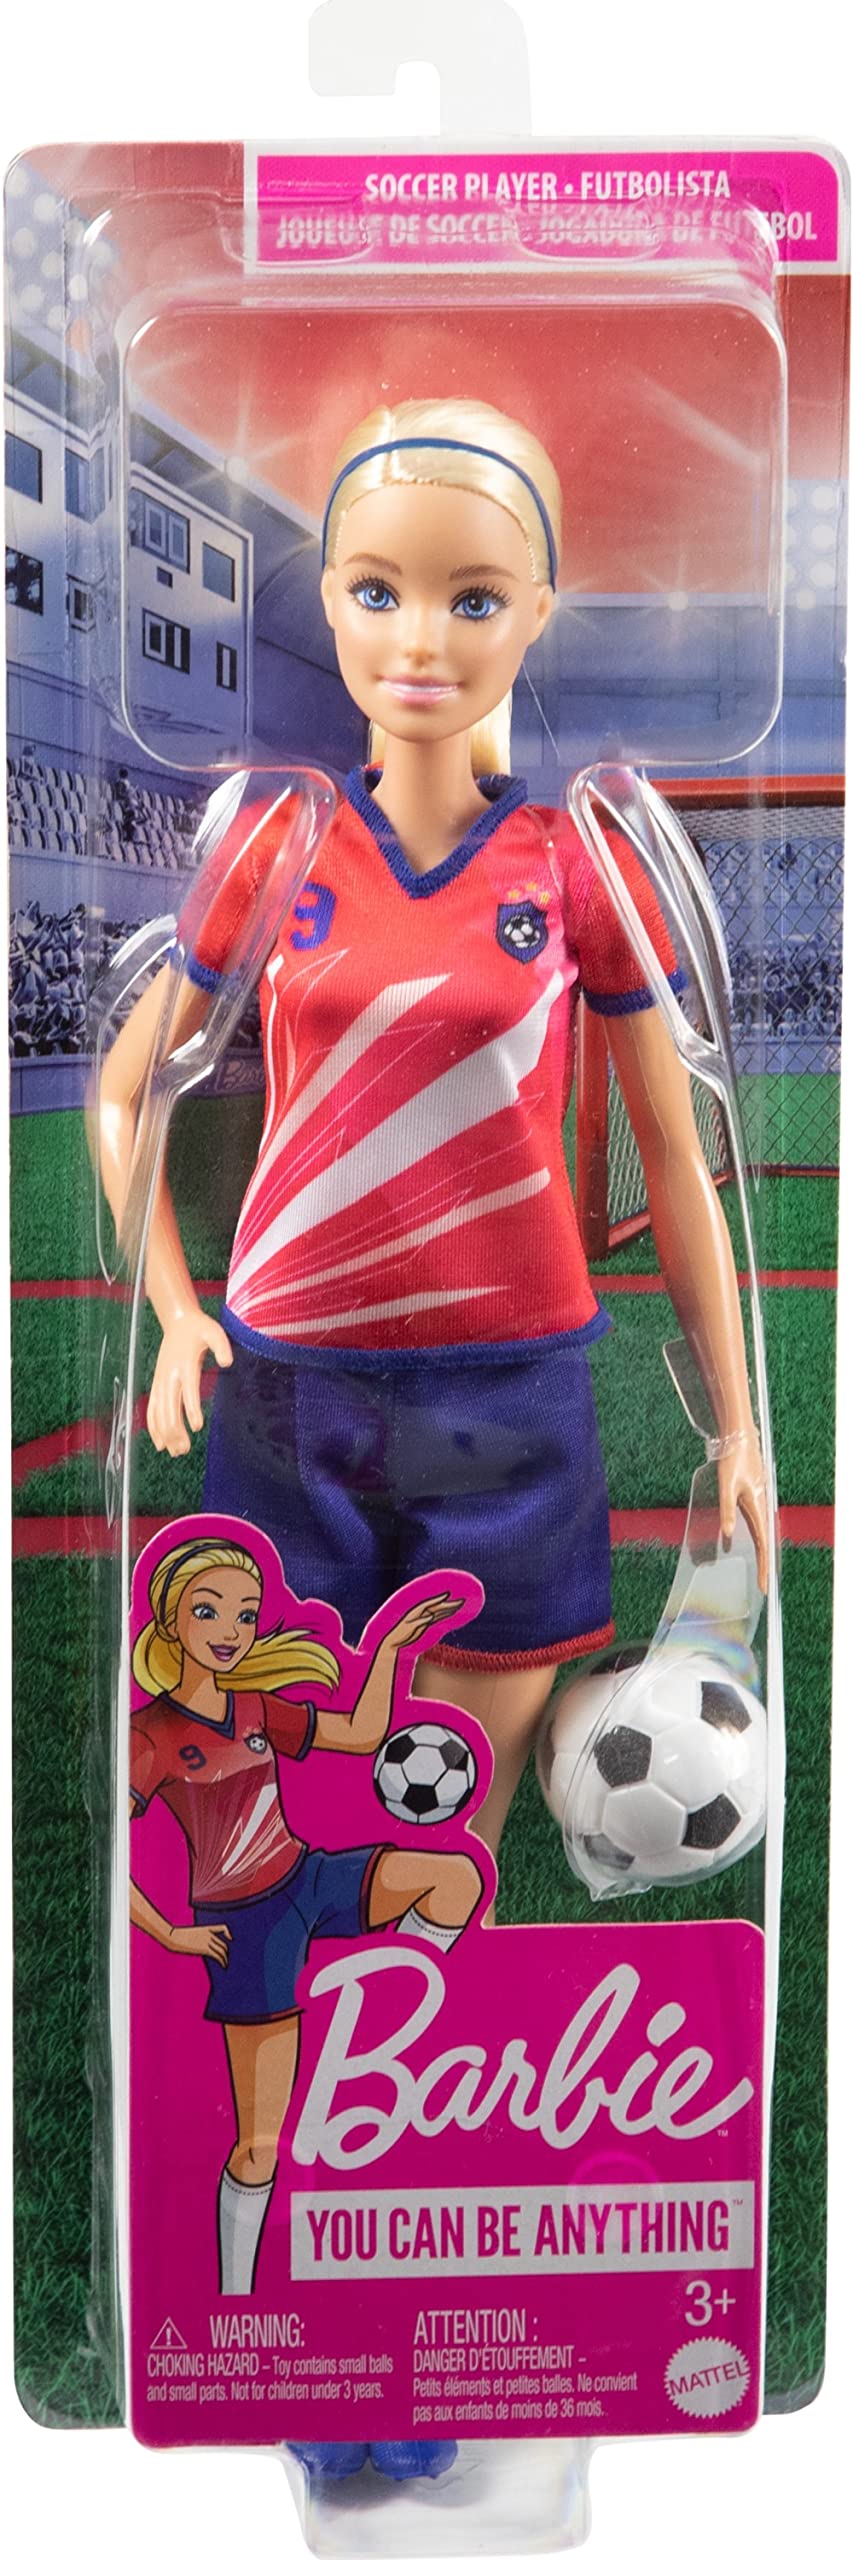 Barbie Soccer Fashion Doll with Blonde Ponytail, Colorful #9 Uniform, Cleats & Tall Socks, Soccer Ball 11.5 inches